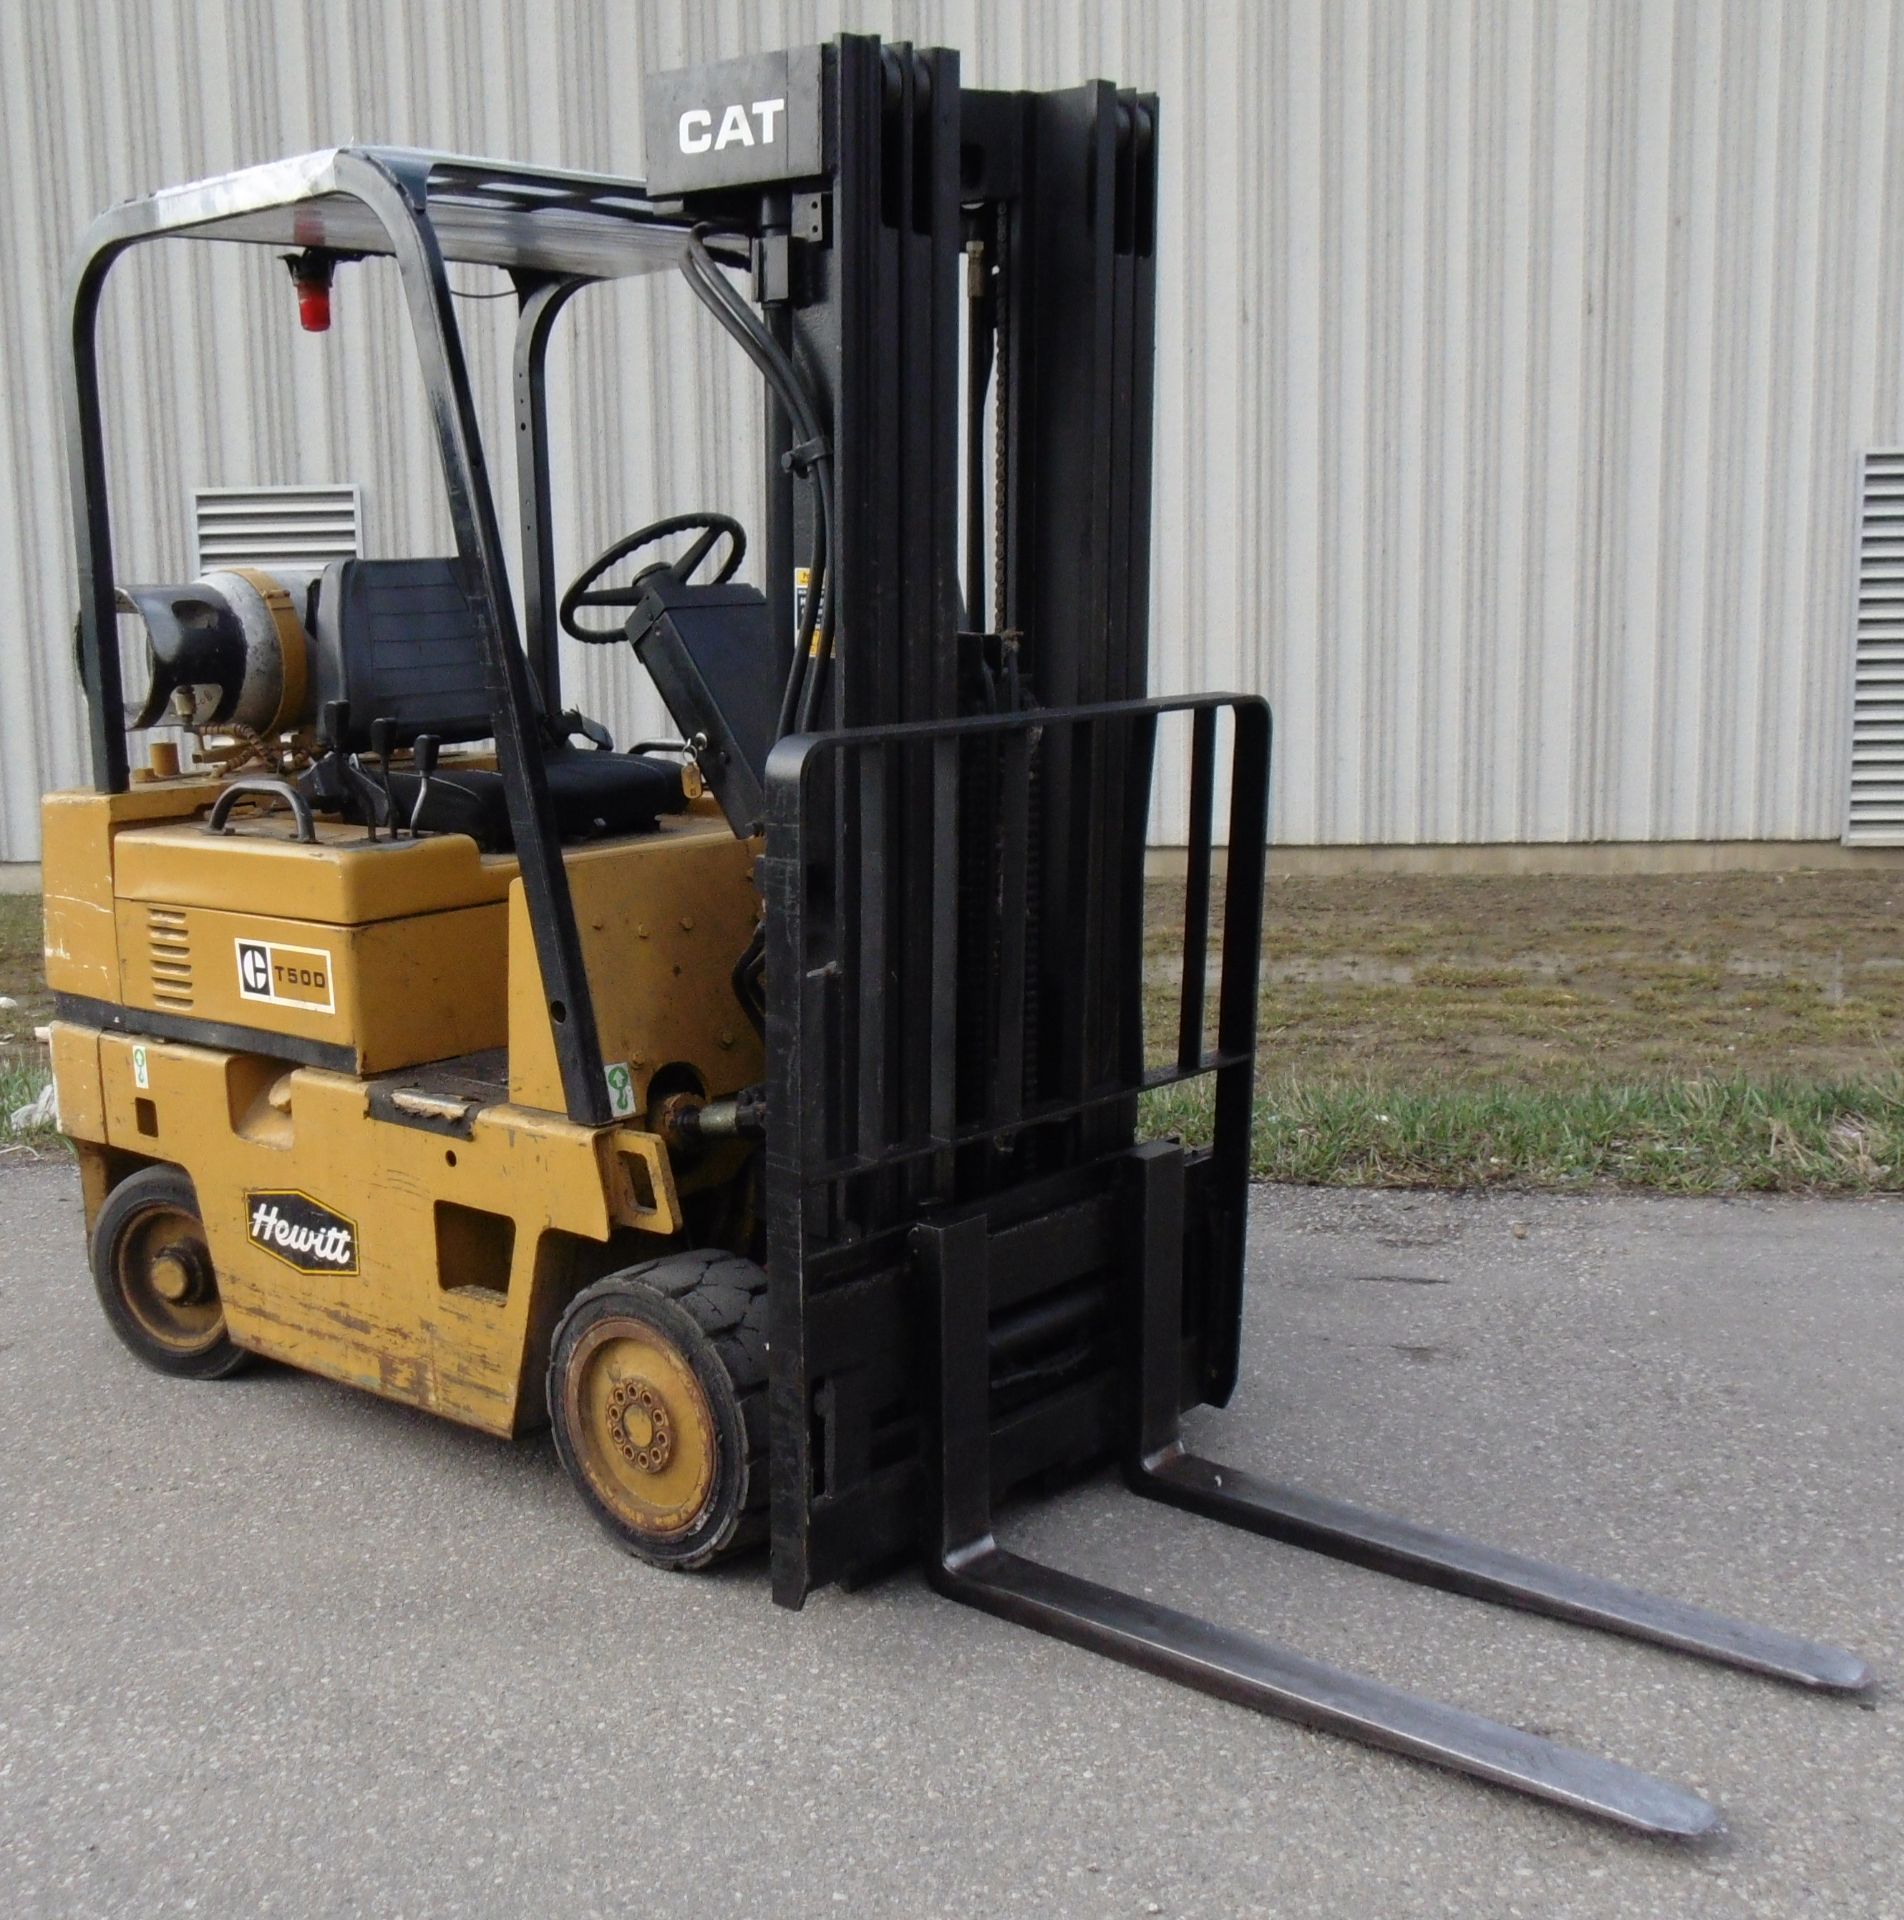 CATERPILLAR T50D 4,850 LB CAPACITY LPG FORKLIFT WITH 188" LIFT, 3 STAGE MAST, SIDE SHIFT, SOLID - Image 2 of 2